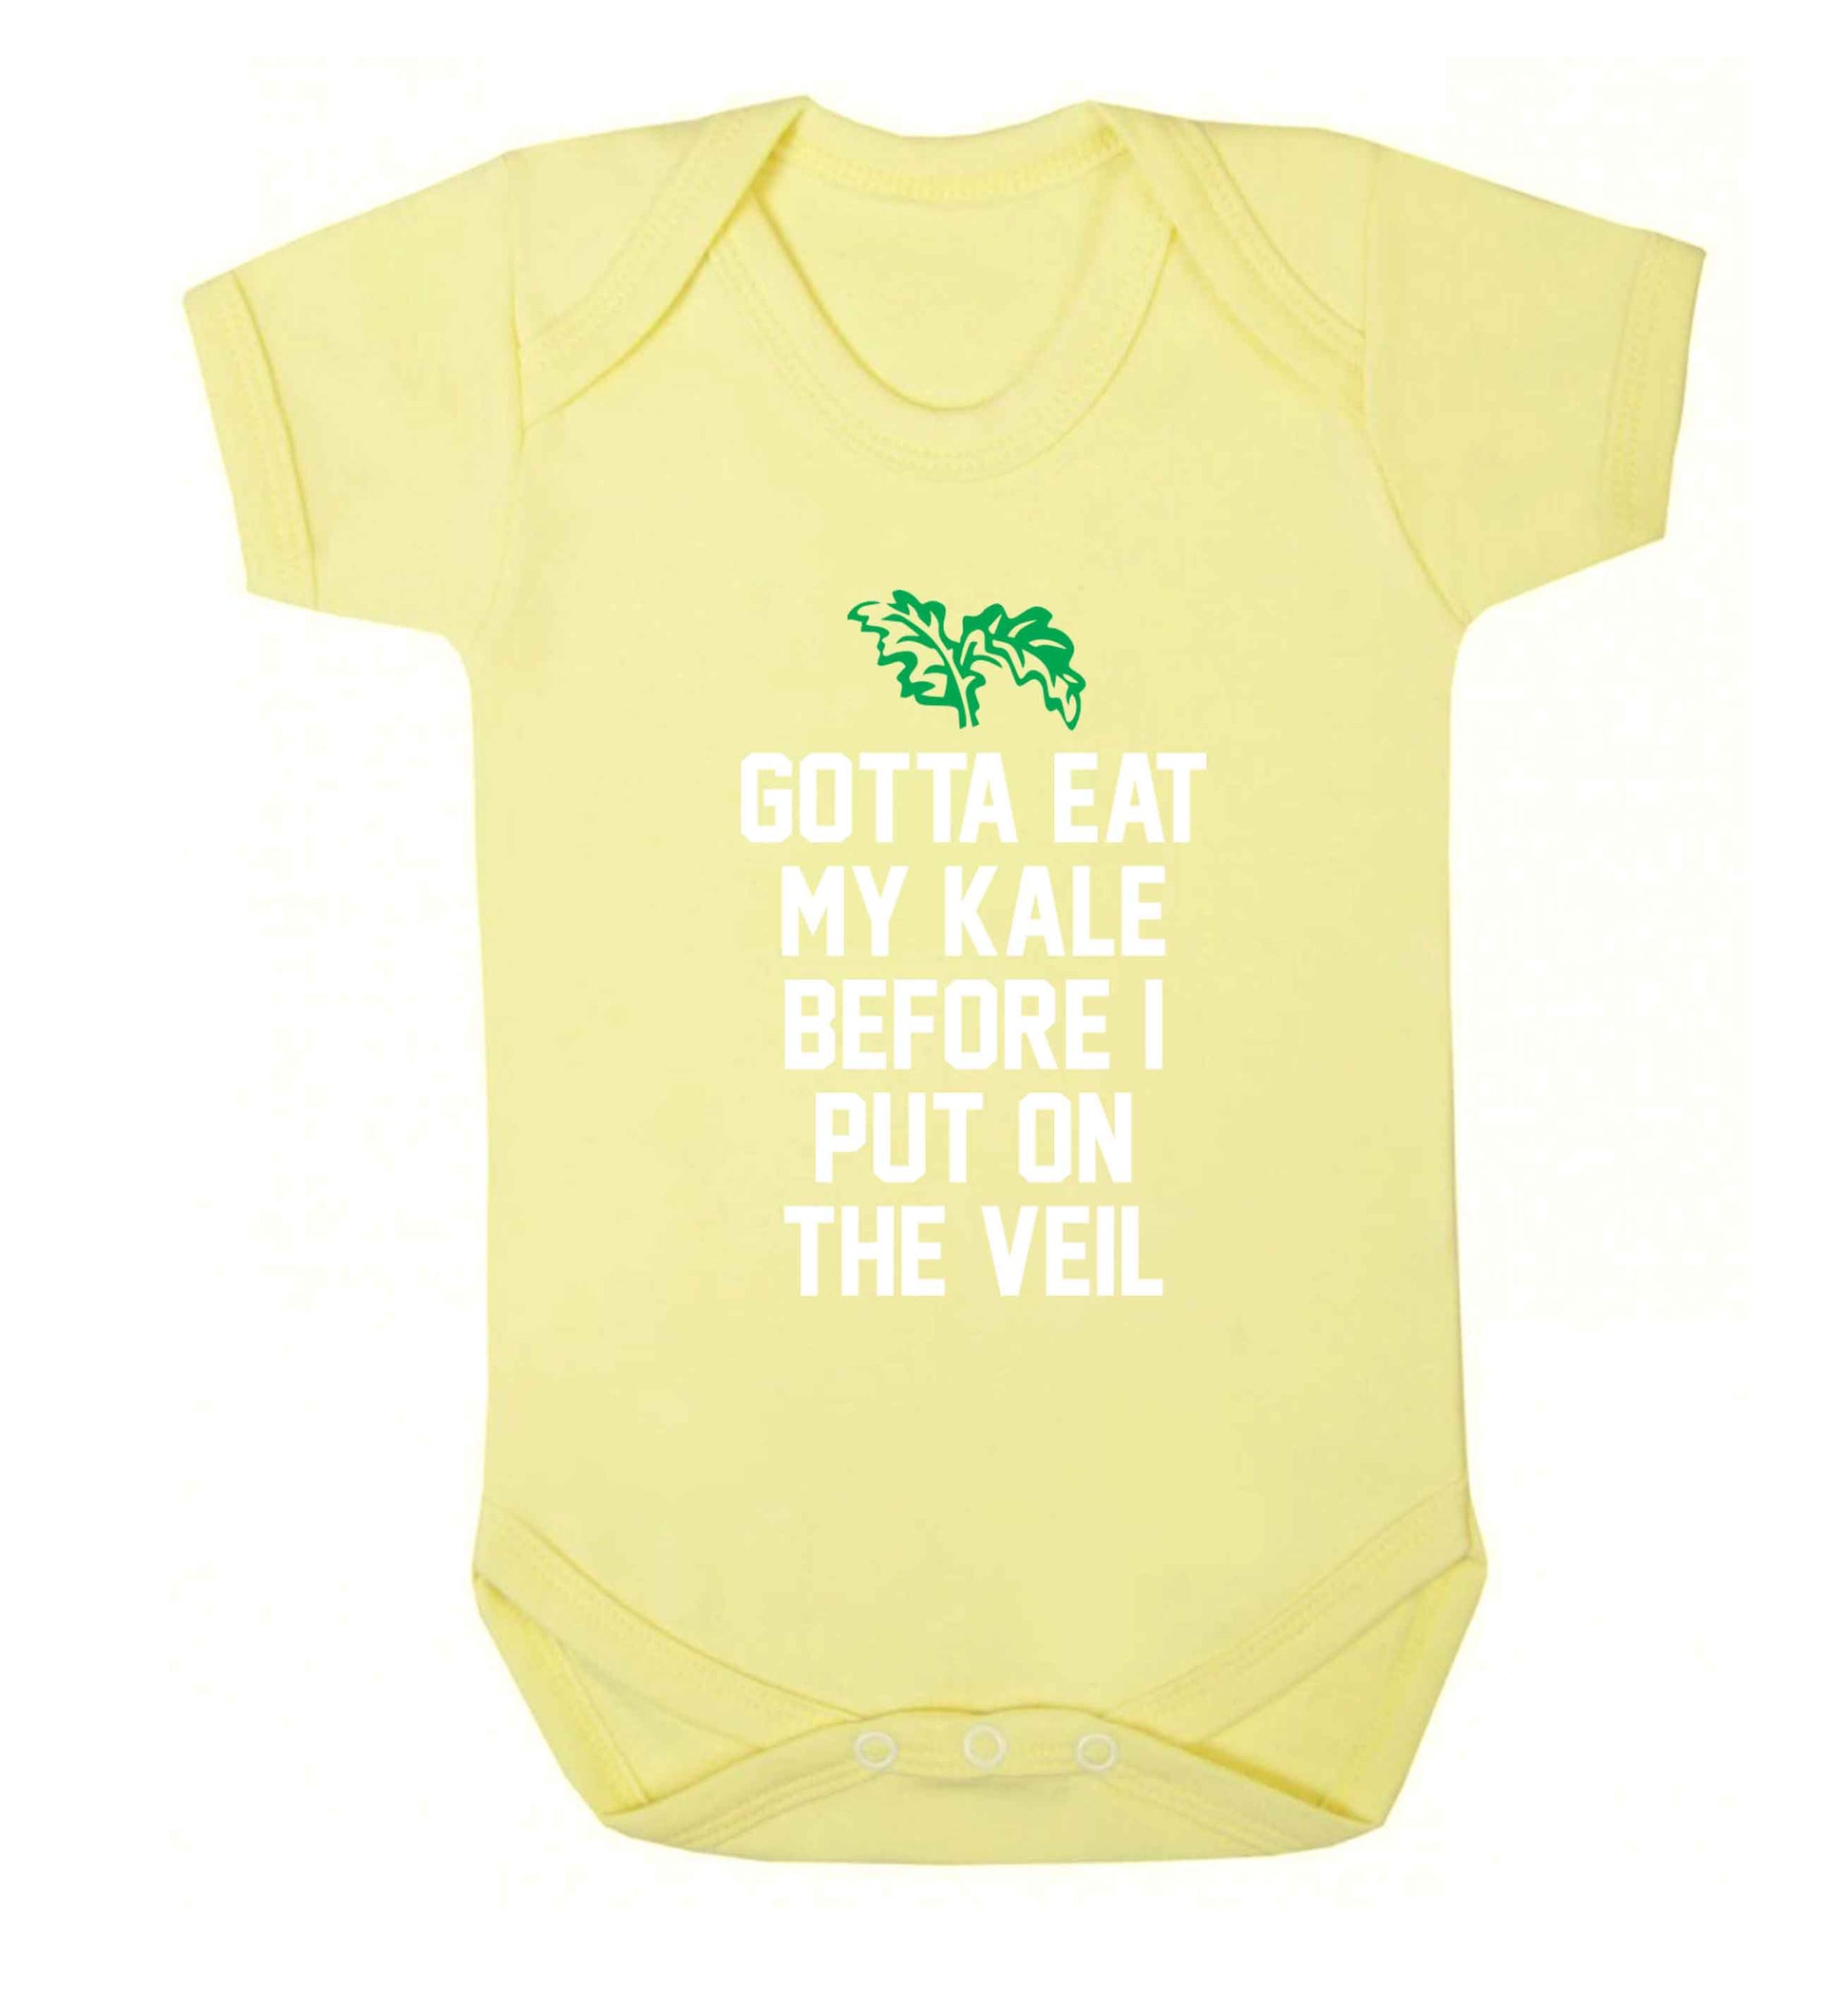 Gotta eat my kale before I put on the veil Baby Vest pale yellow 18-24 months